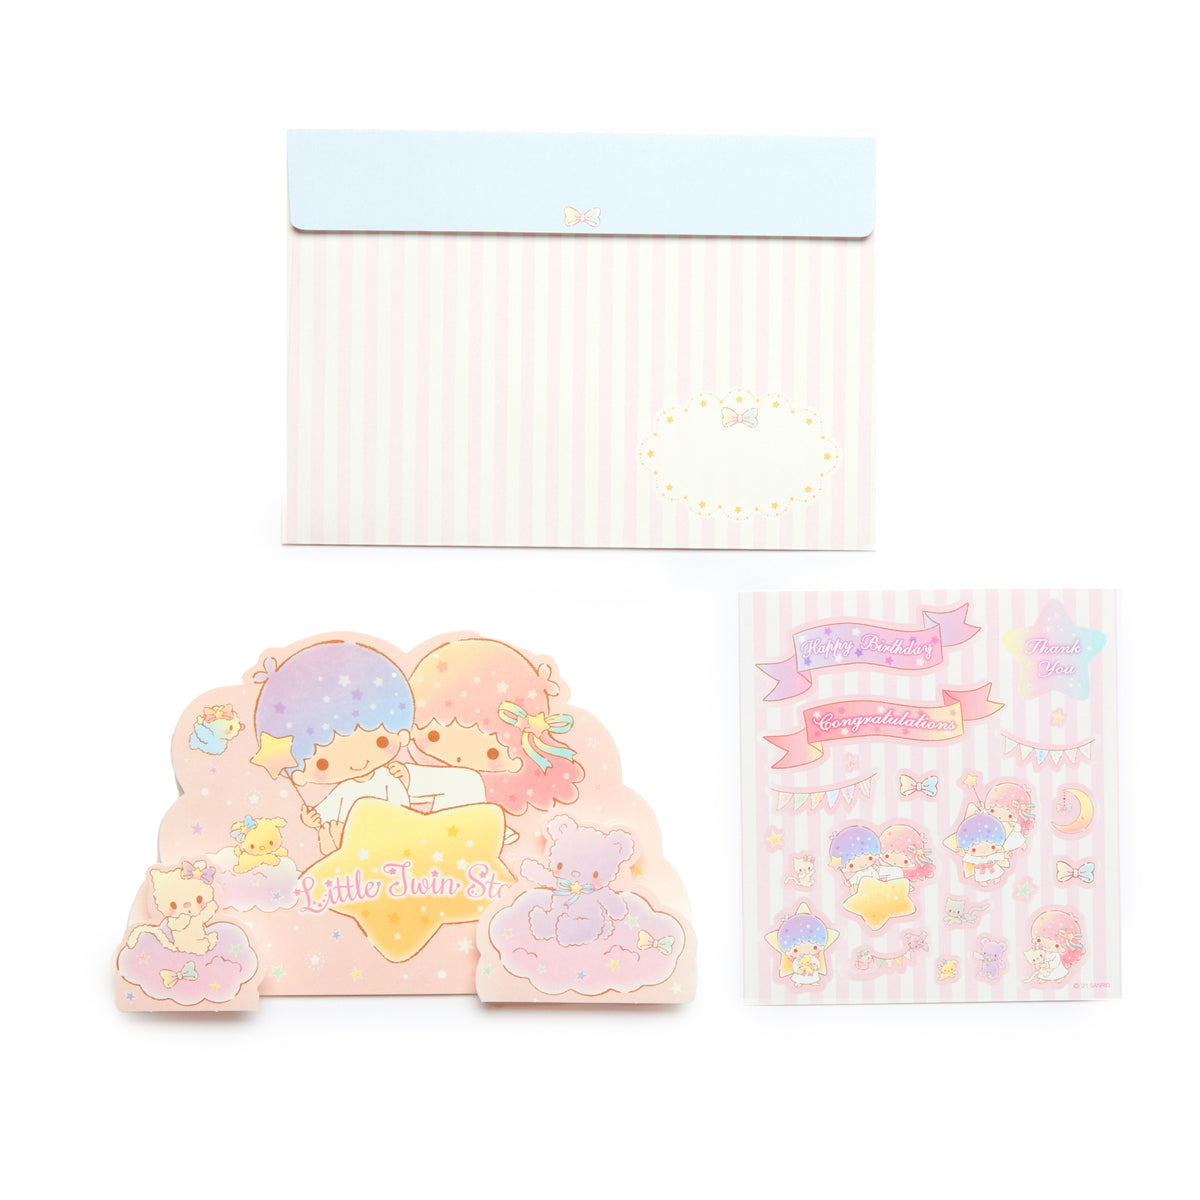 LittleTwinStars Stickers and Greeting Card Stationery Japan Original   